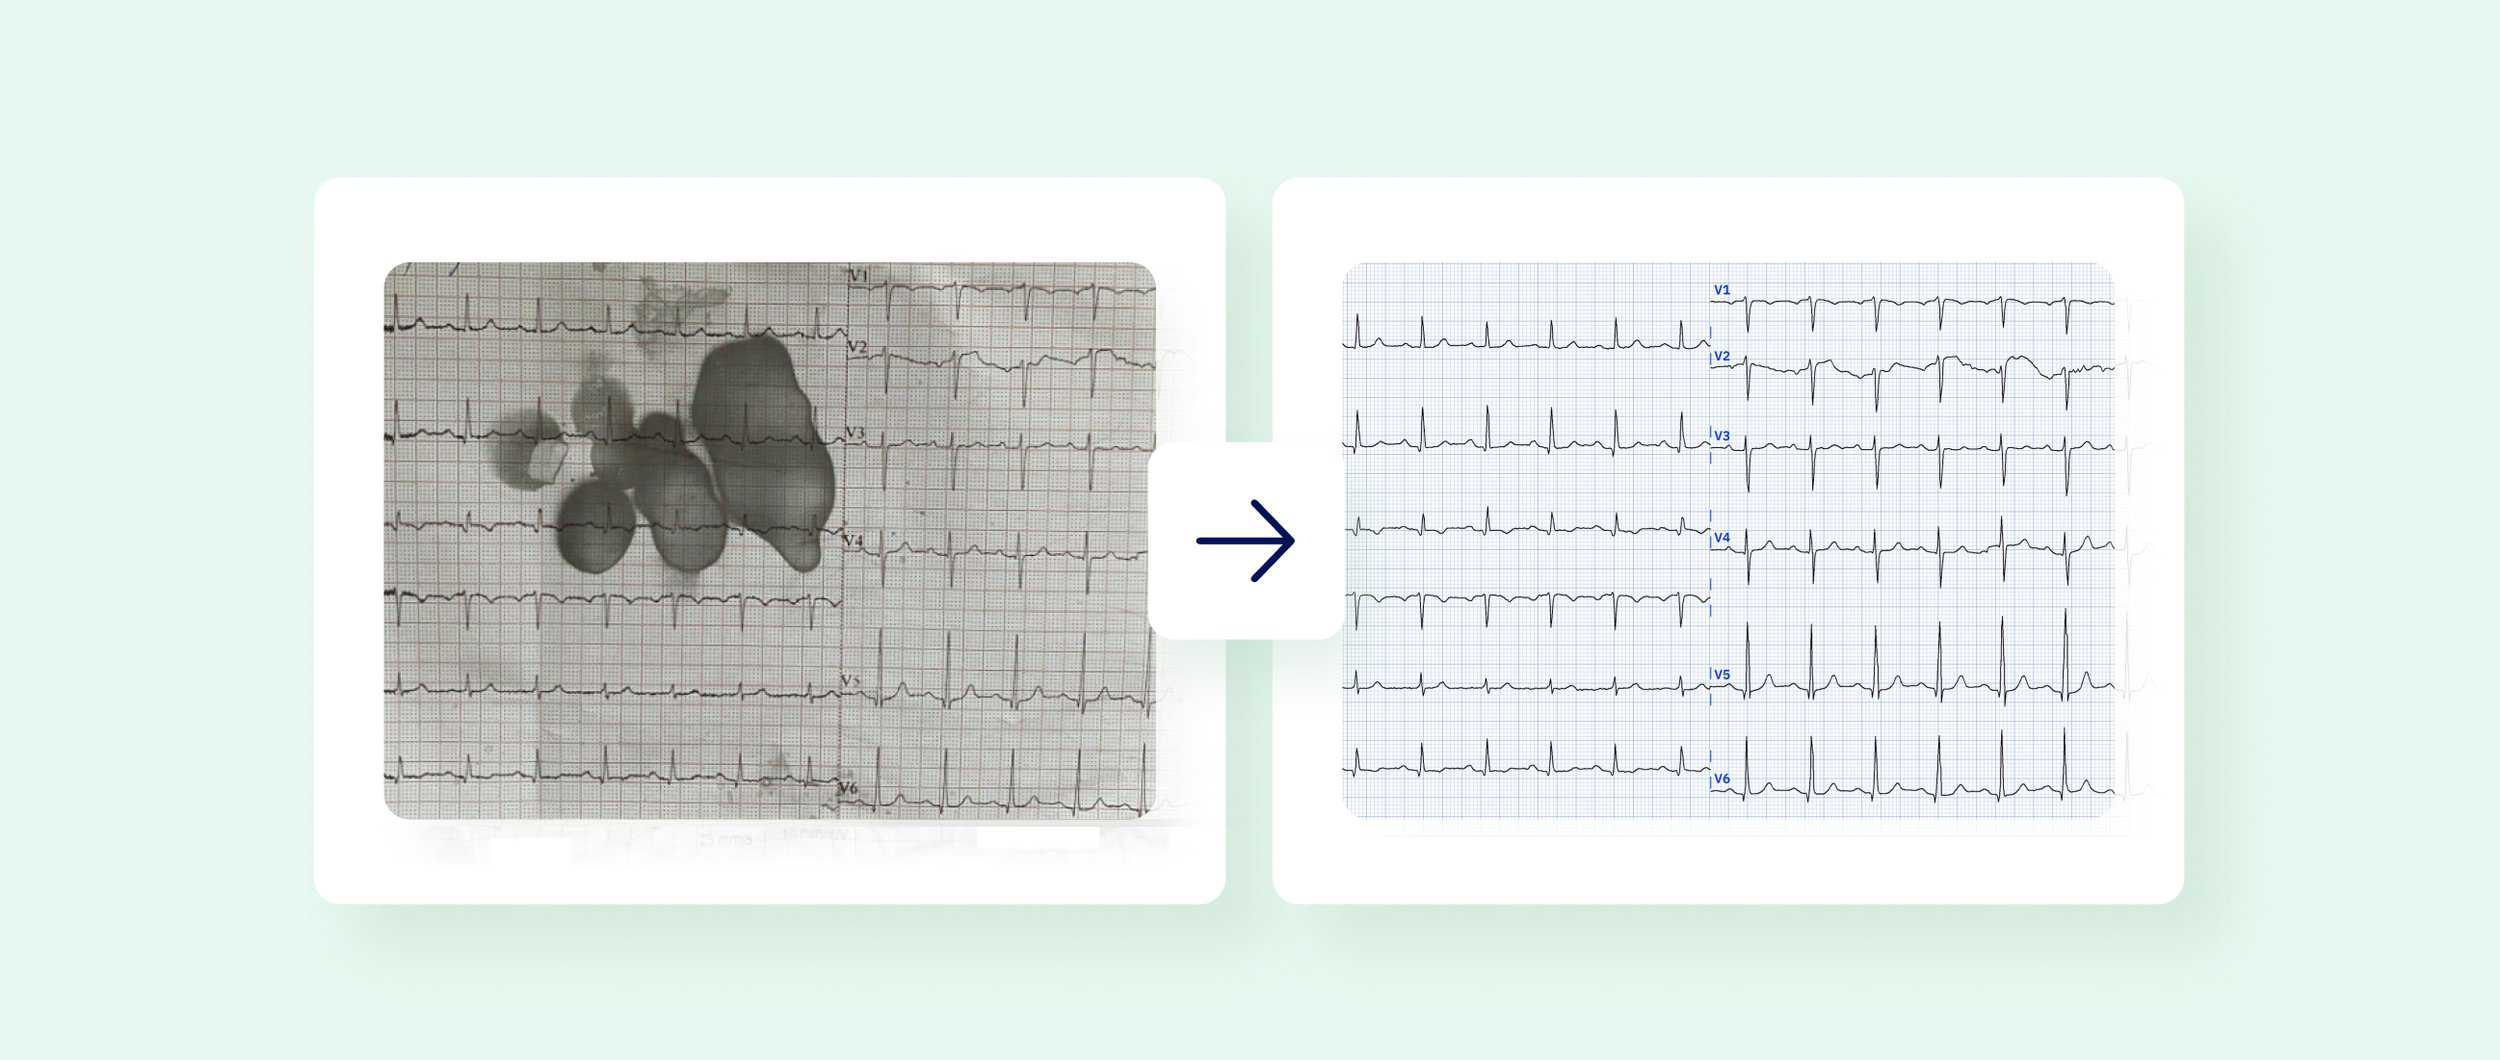 An image of a stained, poor-quality ECG and next to it a corrected ECG recording digitized by PMcardio